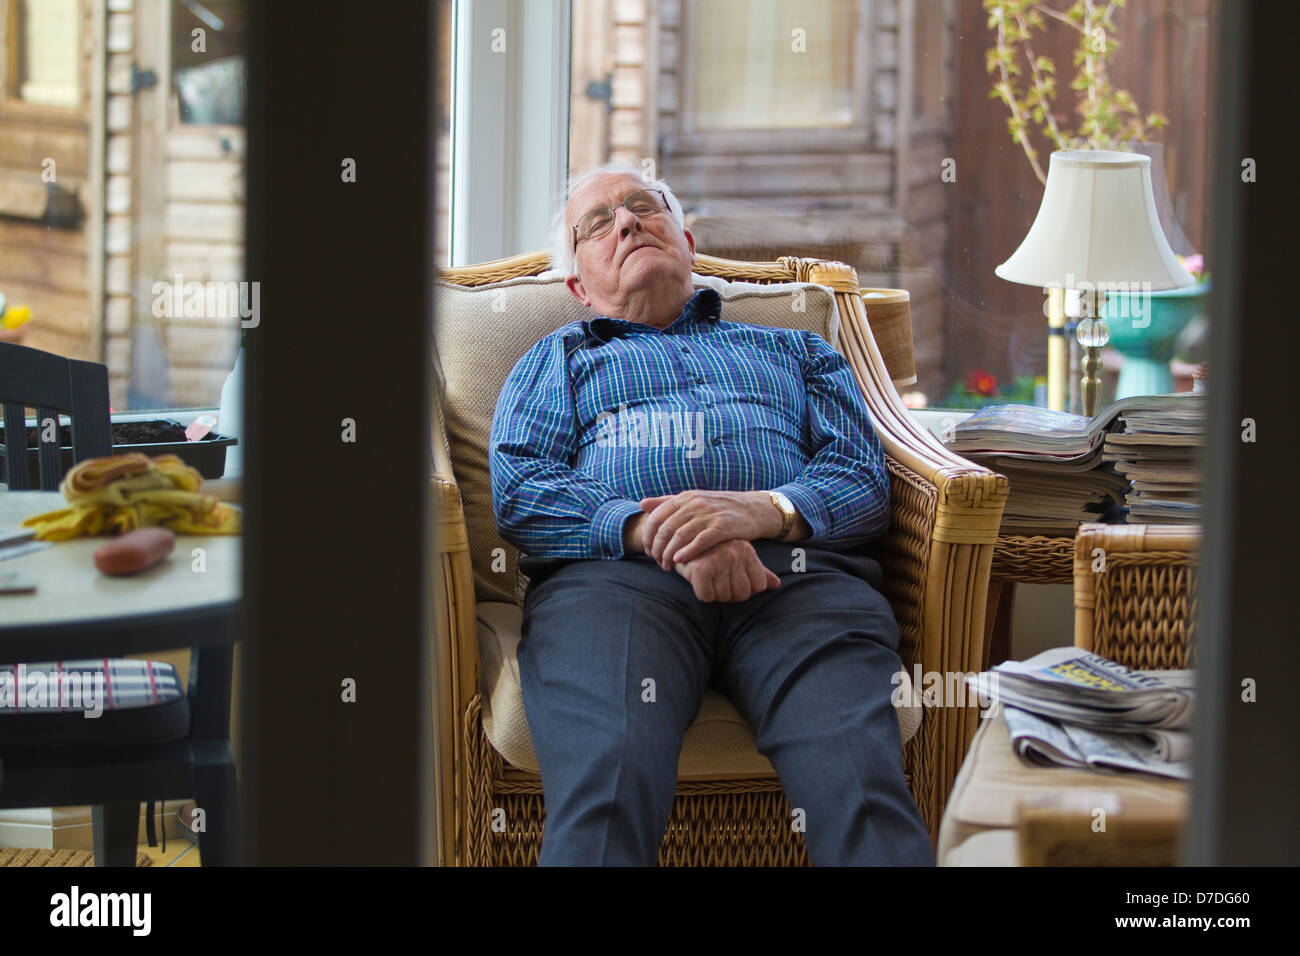 80 year old man snoozing in his conservatory during the afternoon, England, UK Stock Photo